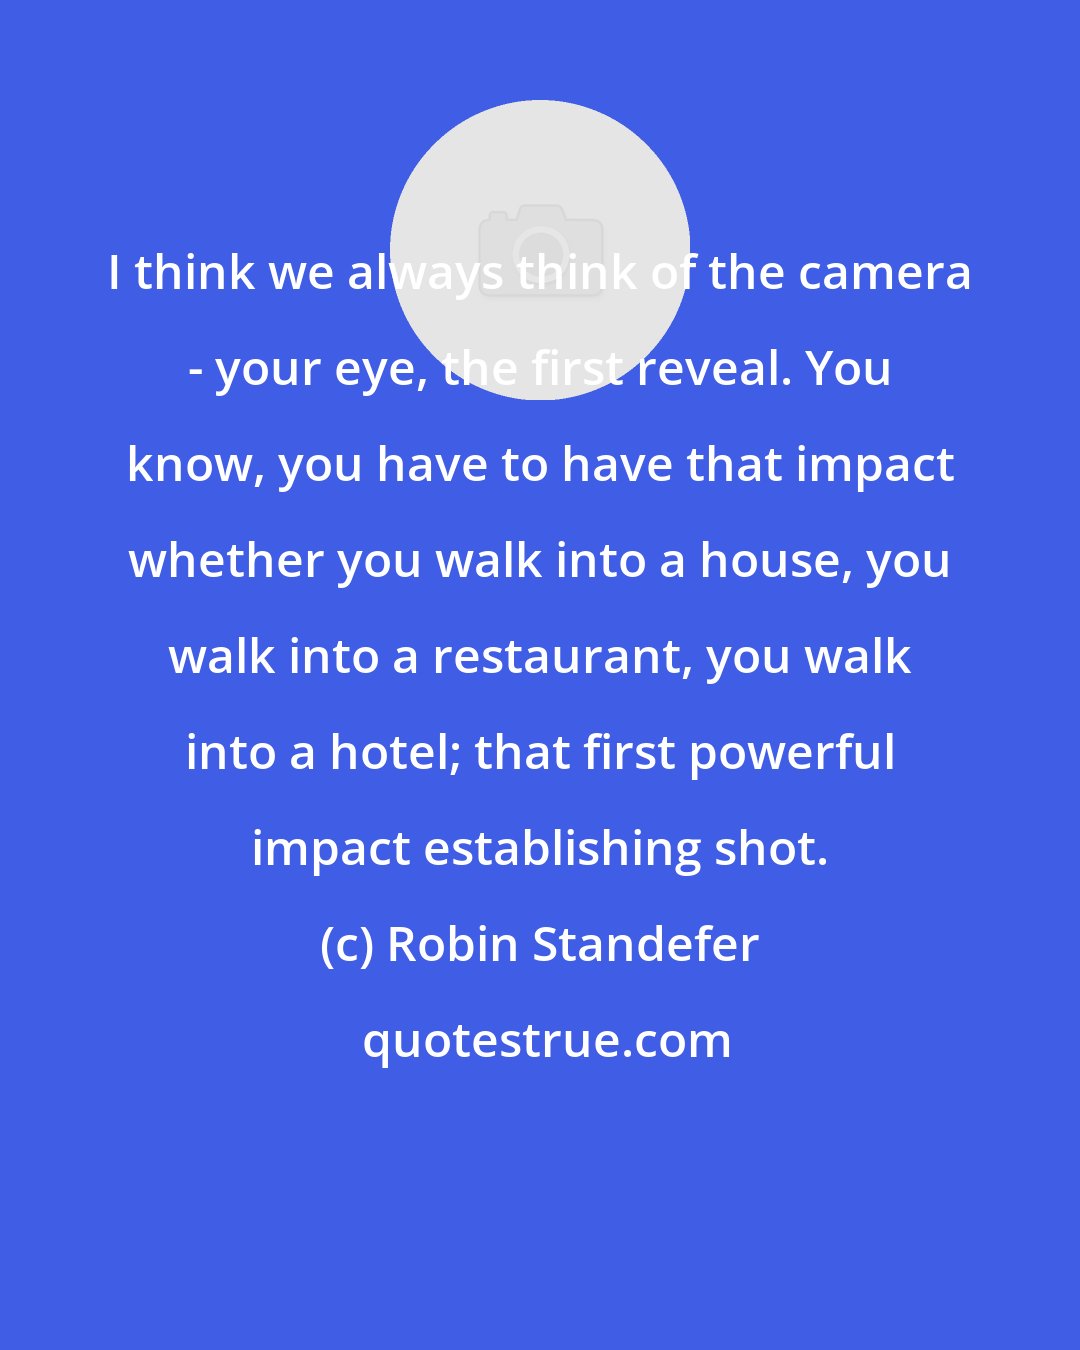 Robin Standefer: I think we always think of the camera - your eye, the first reveal. You know, you have to have that impact whether you walk into a house, you walk into a restaurant, you walk into a hotel; that first powerful impact establishing shot.